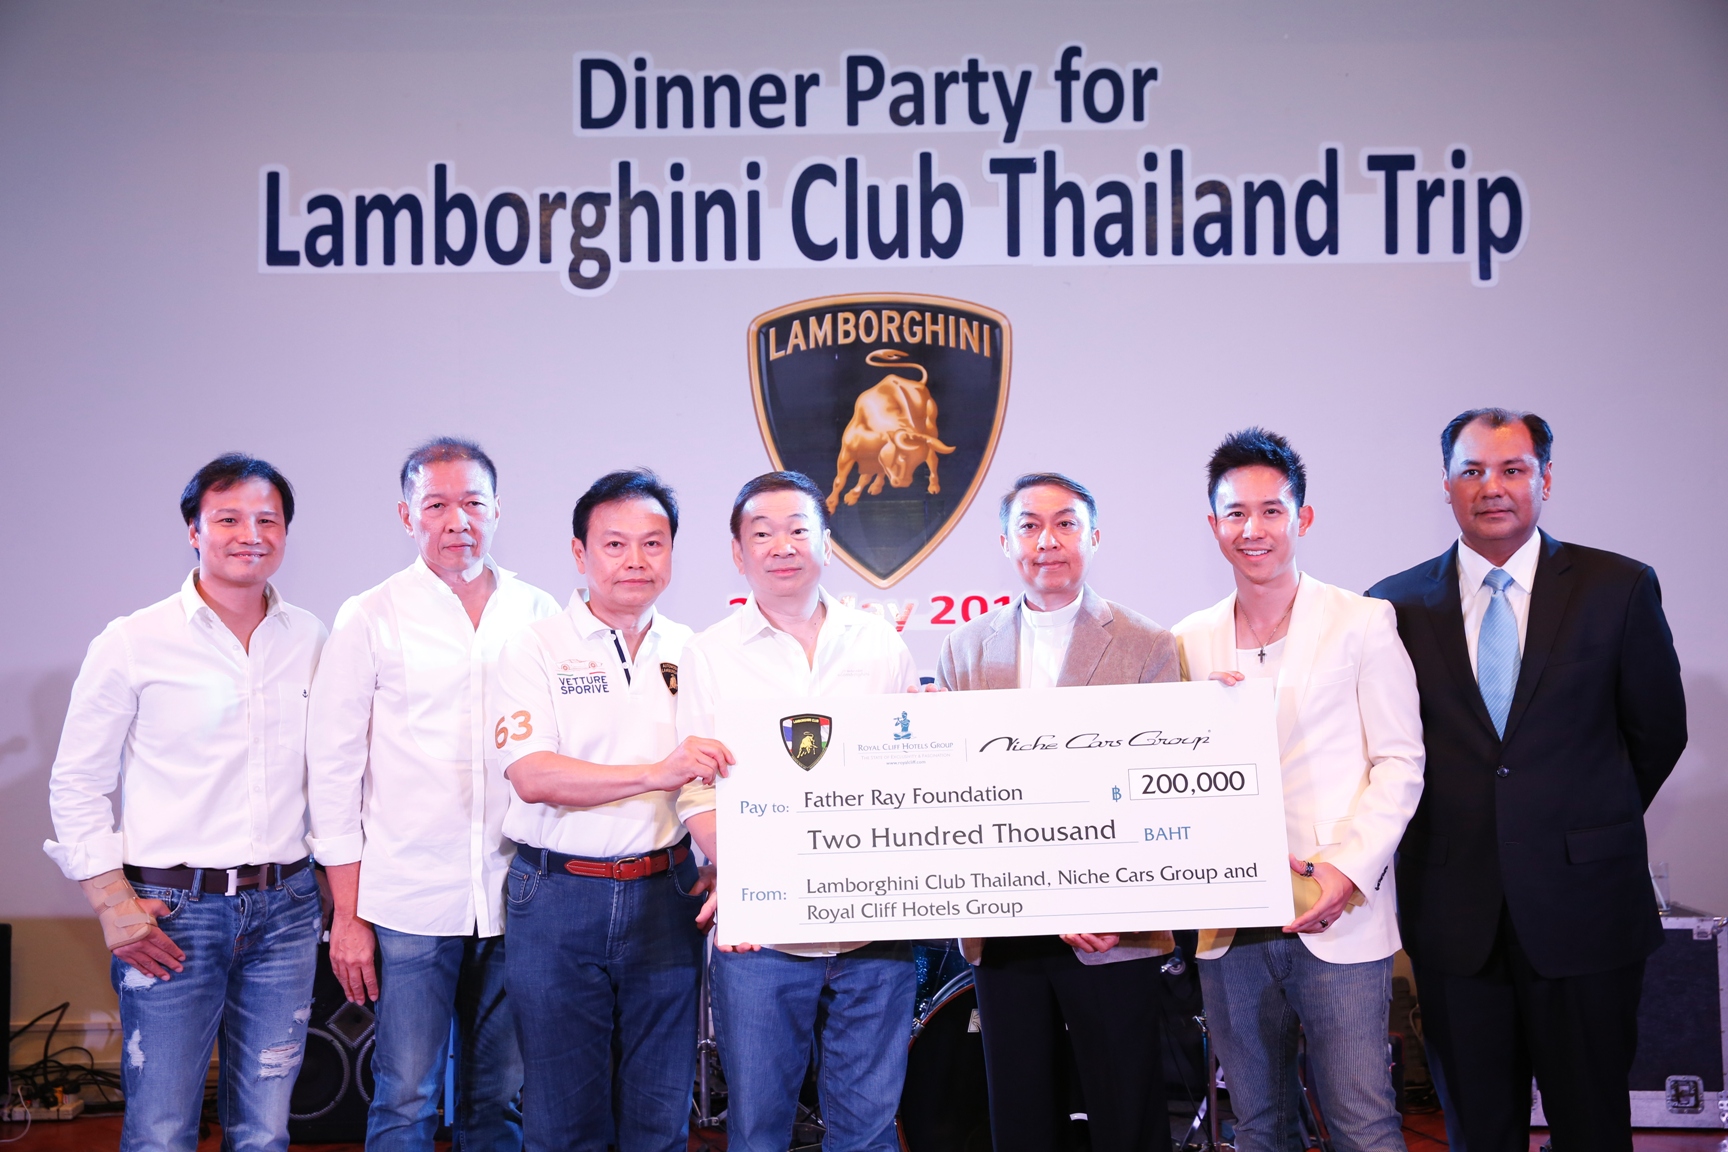 Lamborghini Club (Thailand) together with Royal Cliff Hotels and Niche Cars Group Support Father Ray Foundation